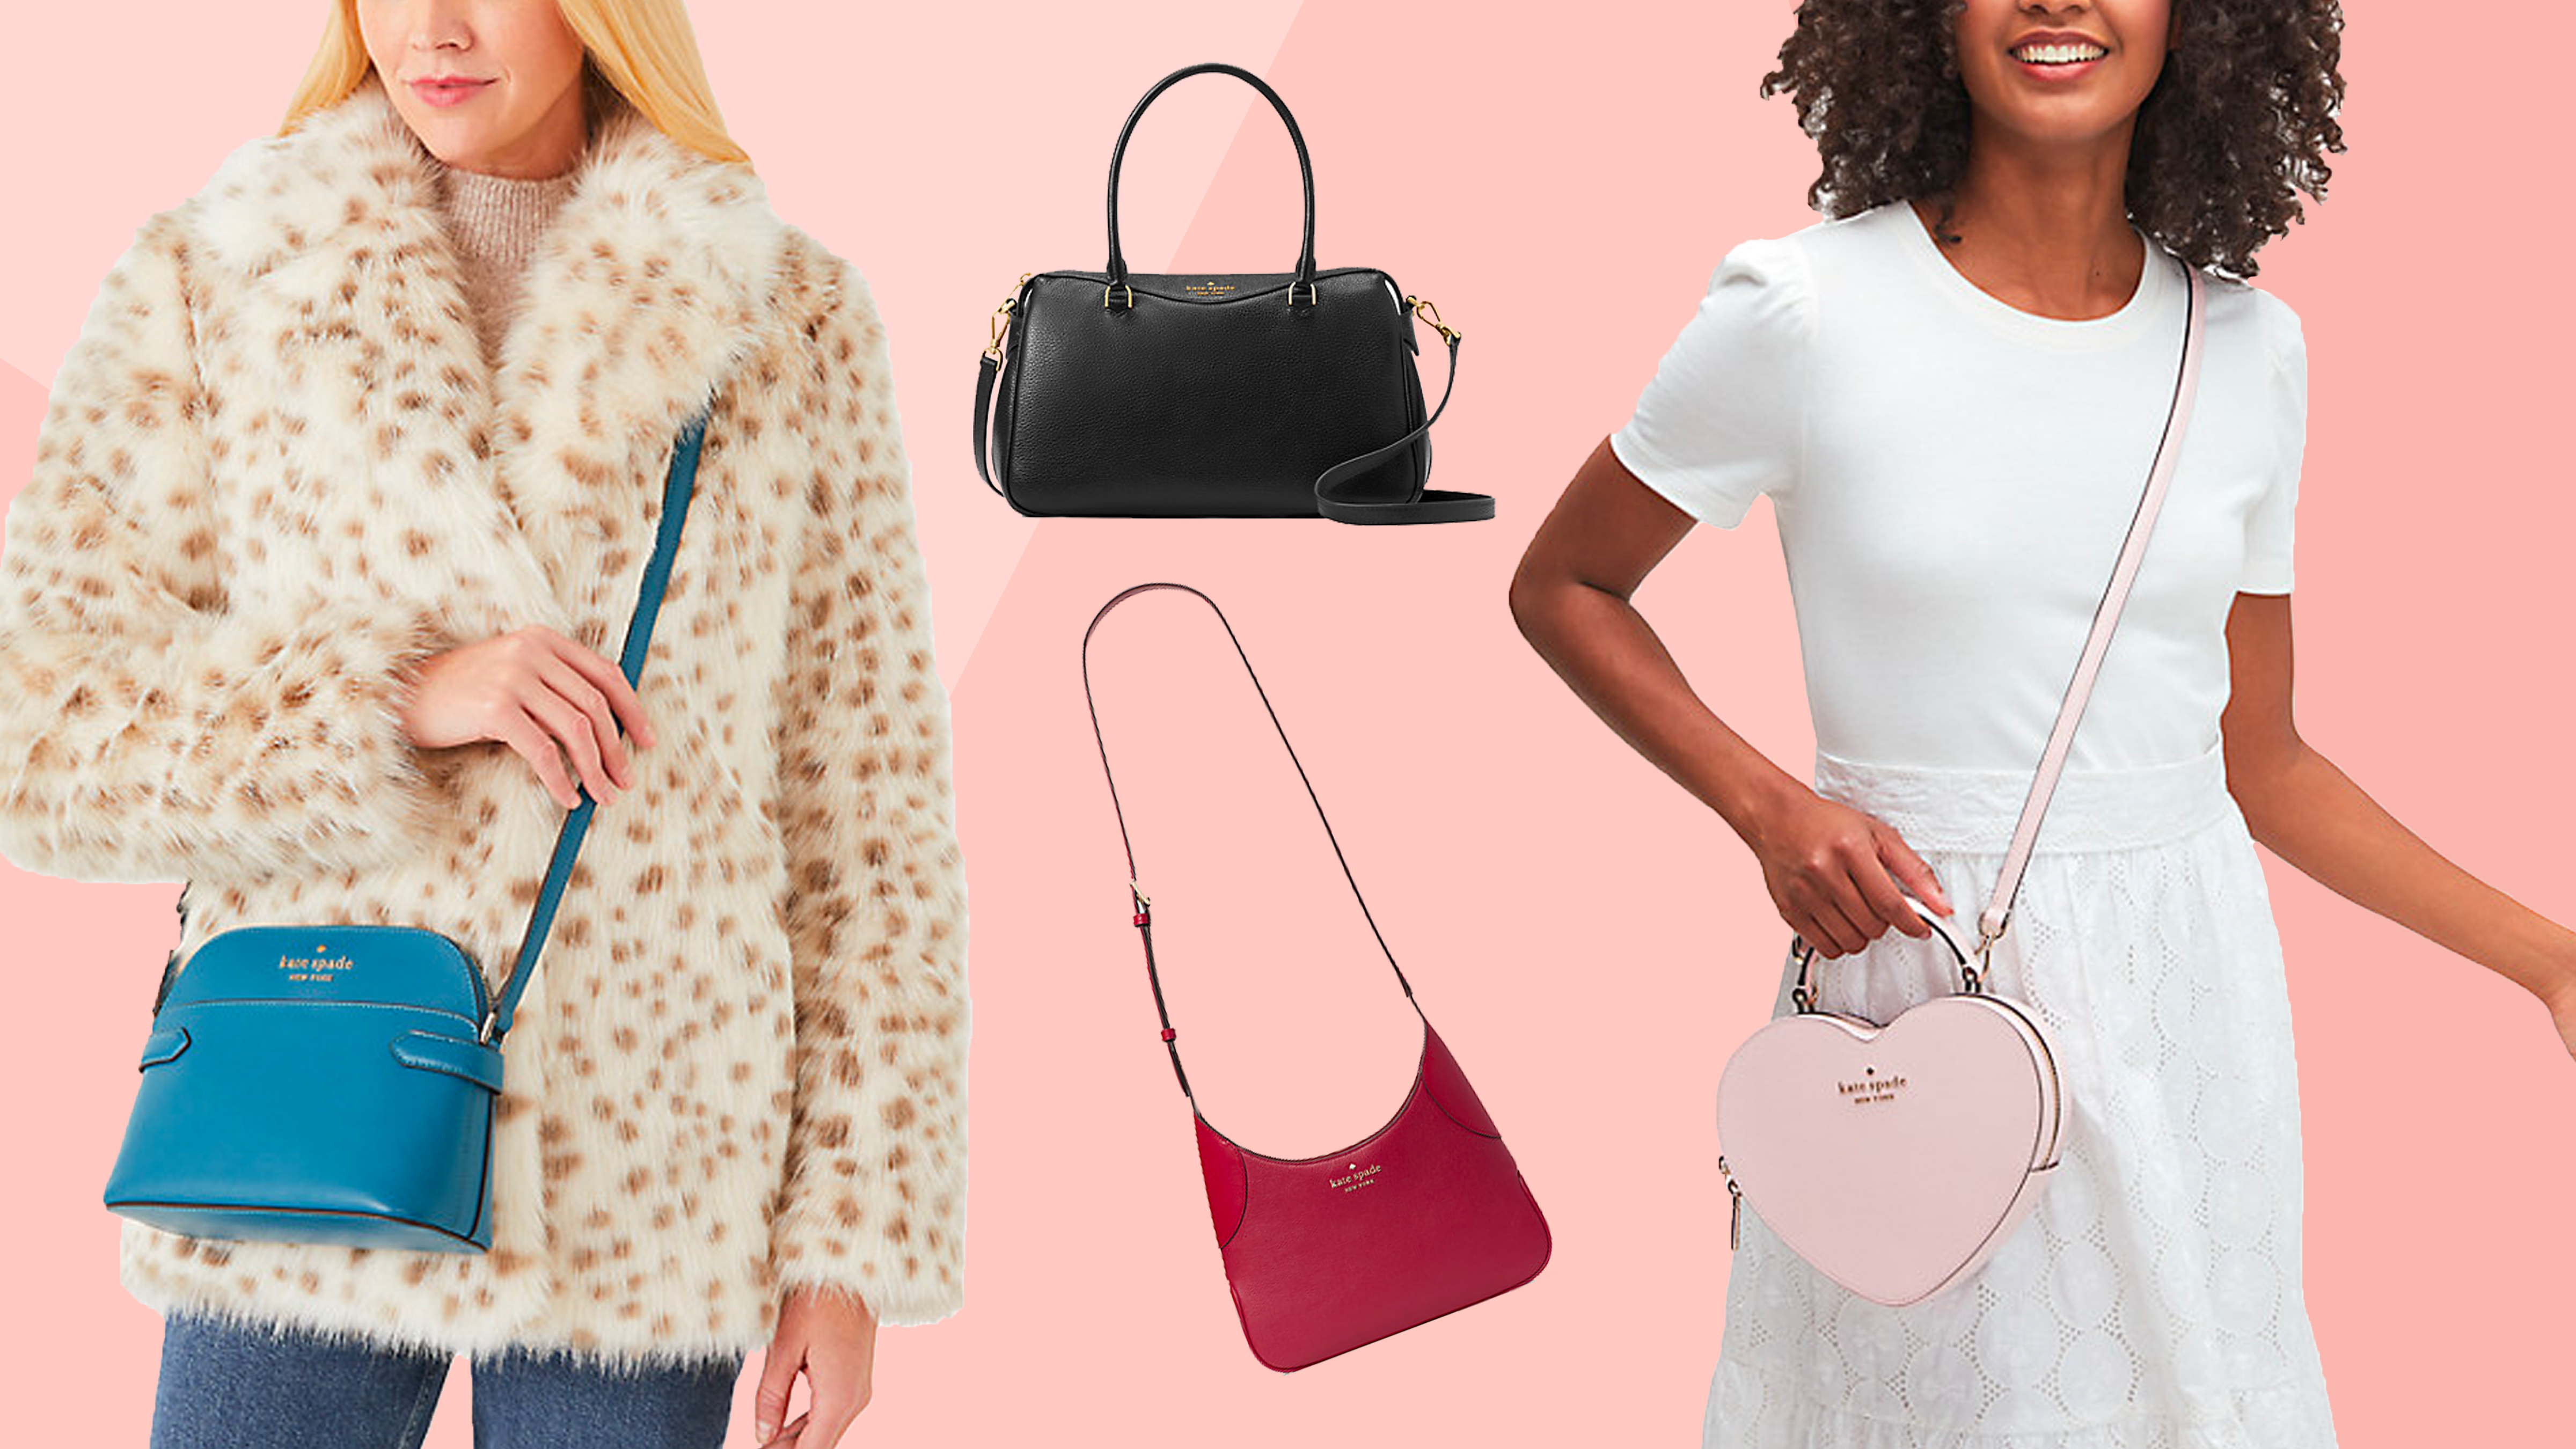 Treat your valentine to a Kate Spade purse for 75% off at the Kate Spade Surprise sale now